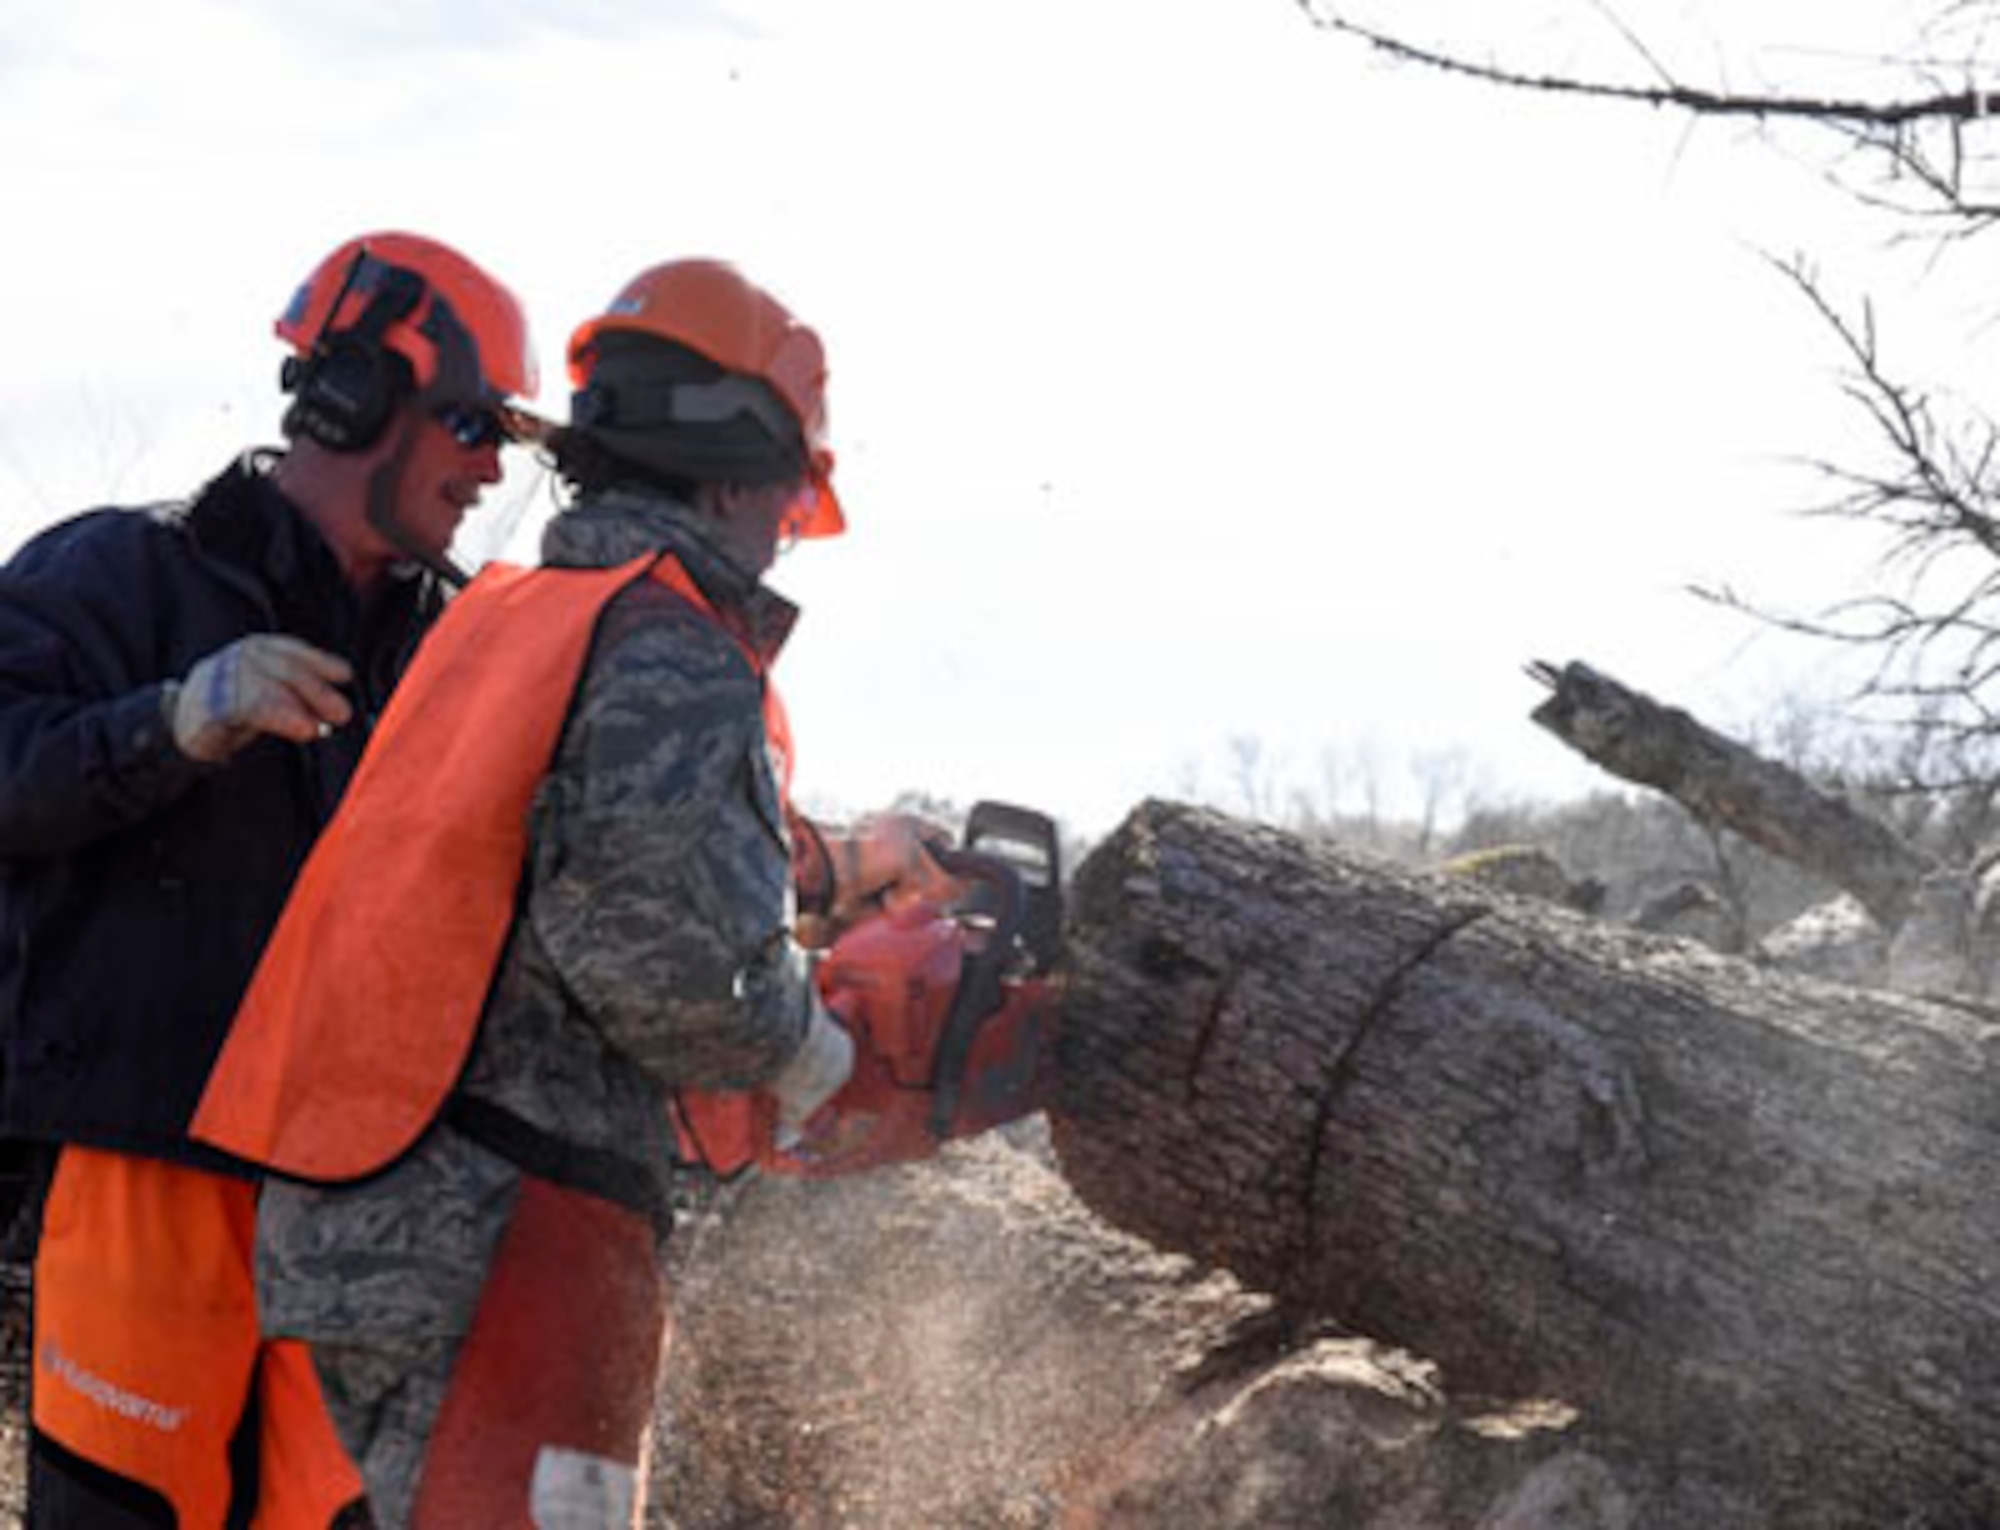 Mr. Greg Hutchison, a volunteer with the Arkansas Baptist State Convention Disaster Relief organization instructs a member of the Rapid Augmentation Team on the proper use of a chainsaw Dec. 20, 2016, at Little Rock Air Force Base, Ark. The training ensured more than 30 R.A.T. volunteers are prepared to handle any situation that may arise during a call to active duty for a state emergency. (U.S. Air National Guard photo by Tech. Sgt. Jessica Condit)